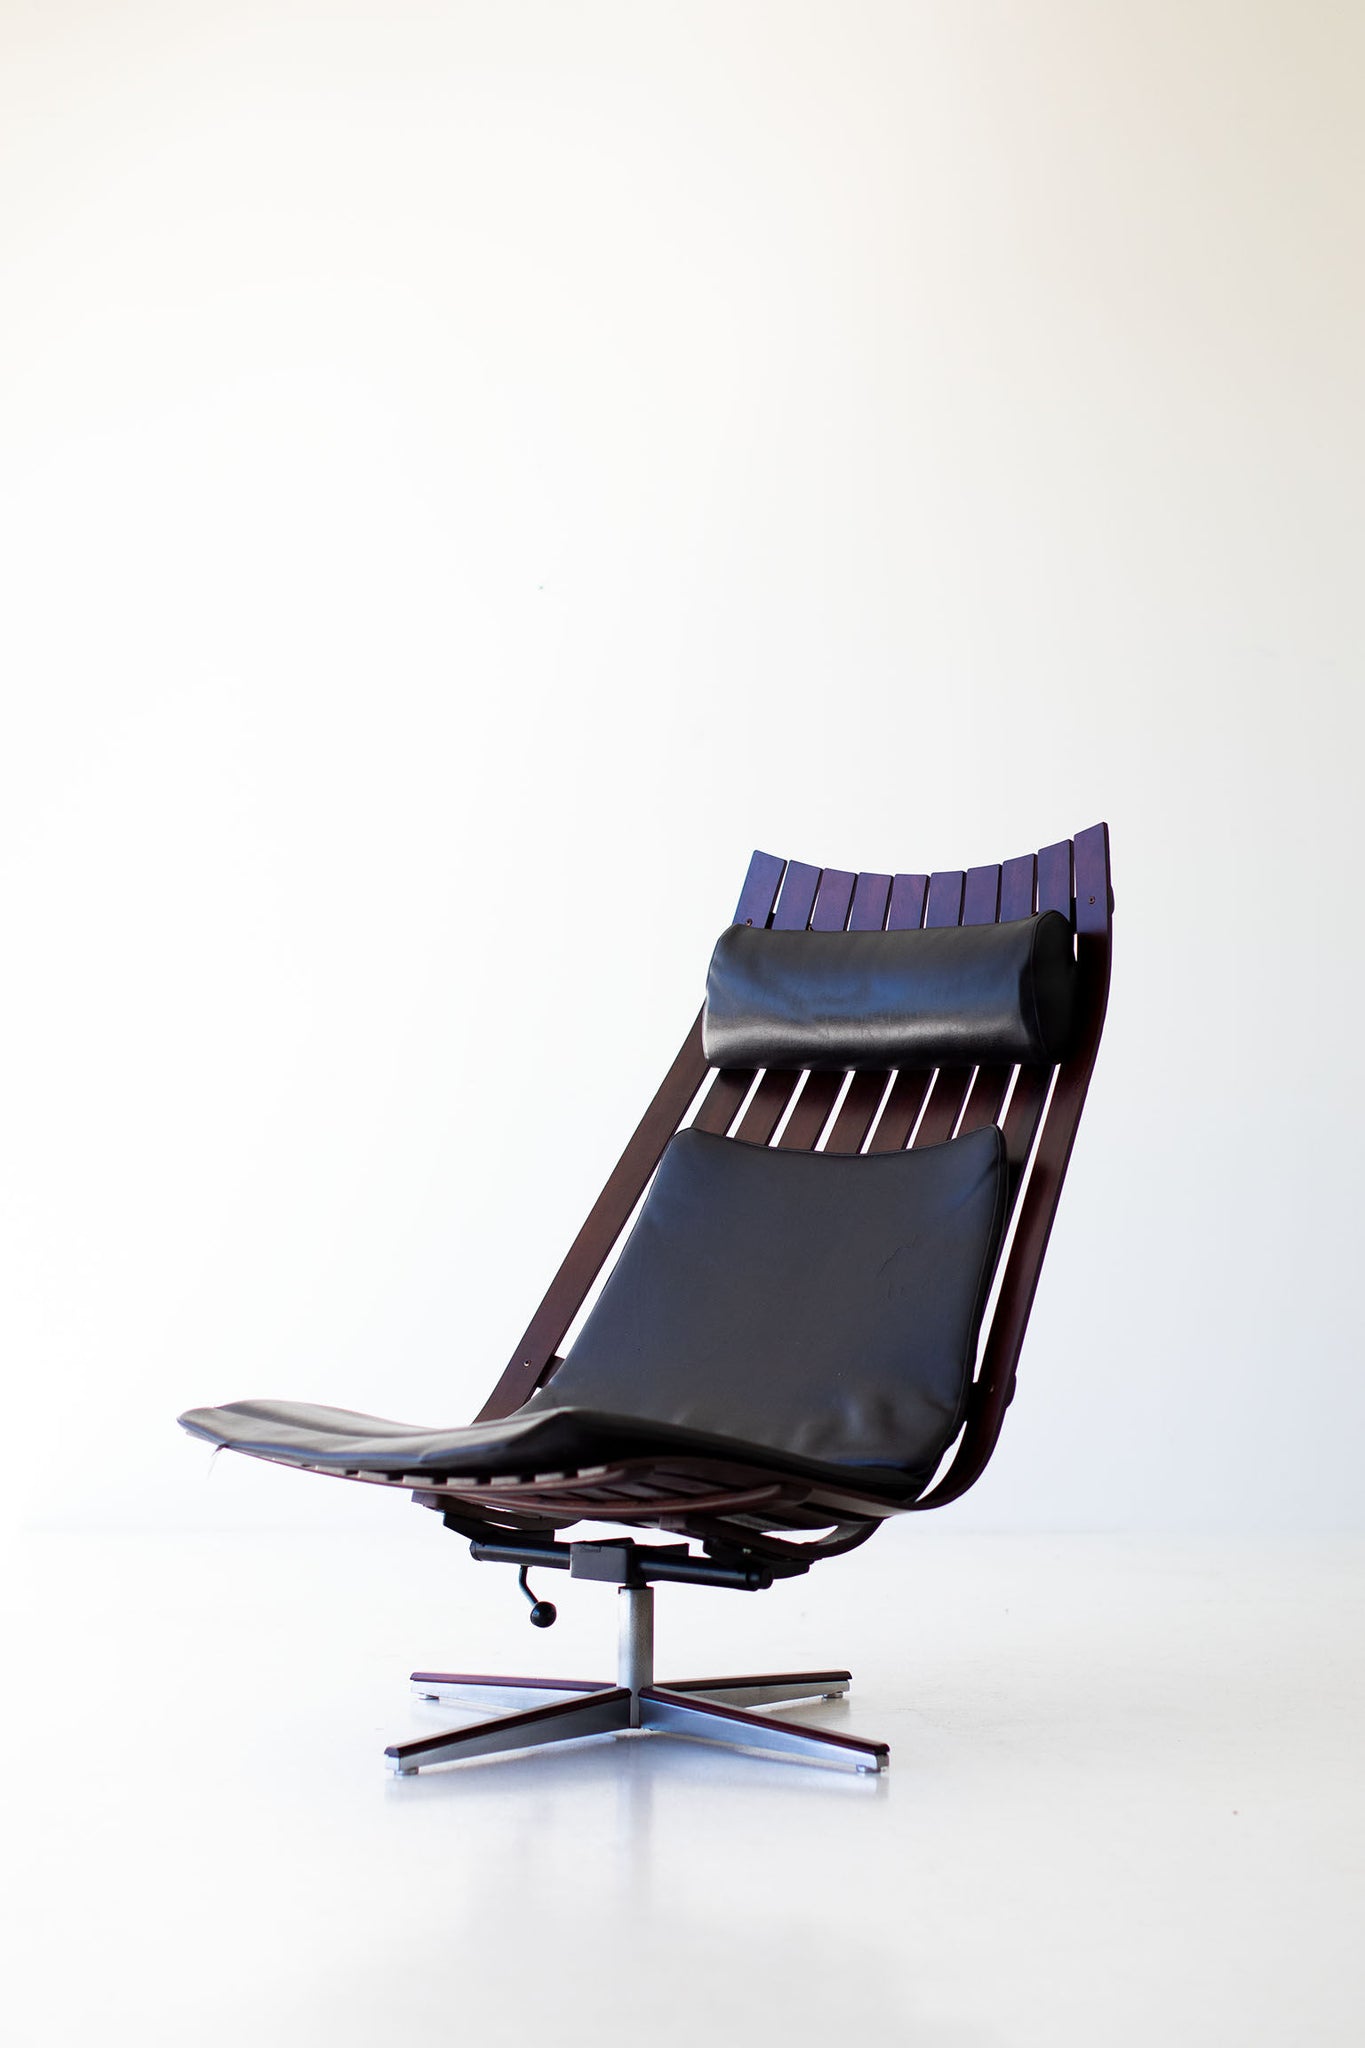 Hans Brattrud Rosewood Lounge Chair for Hove Mobler